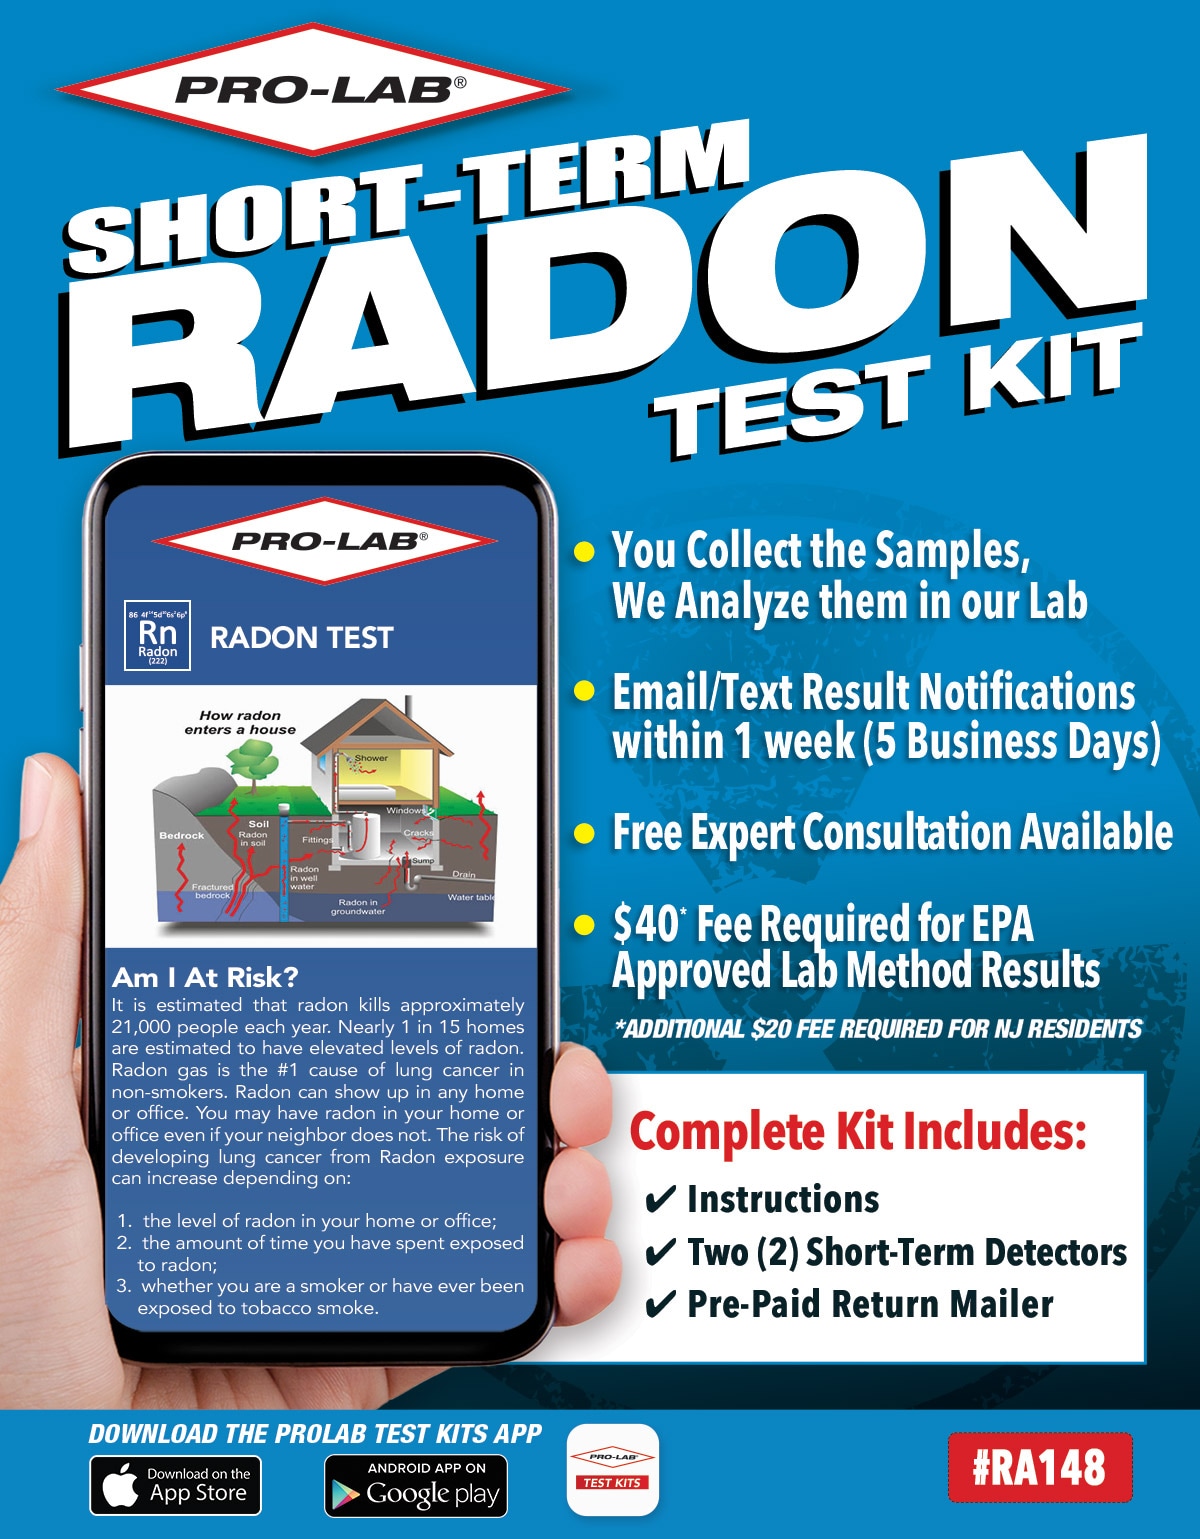 Digital radon gas detector and monitor CDP-RG01 - C.D. Products